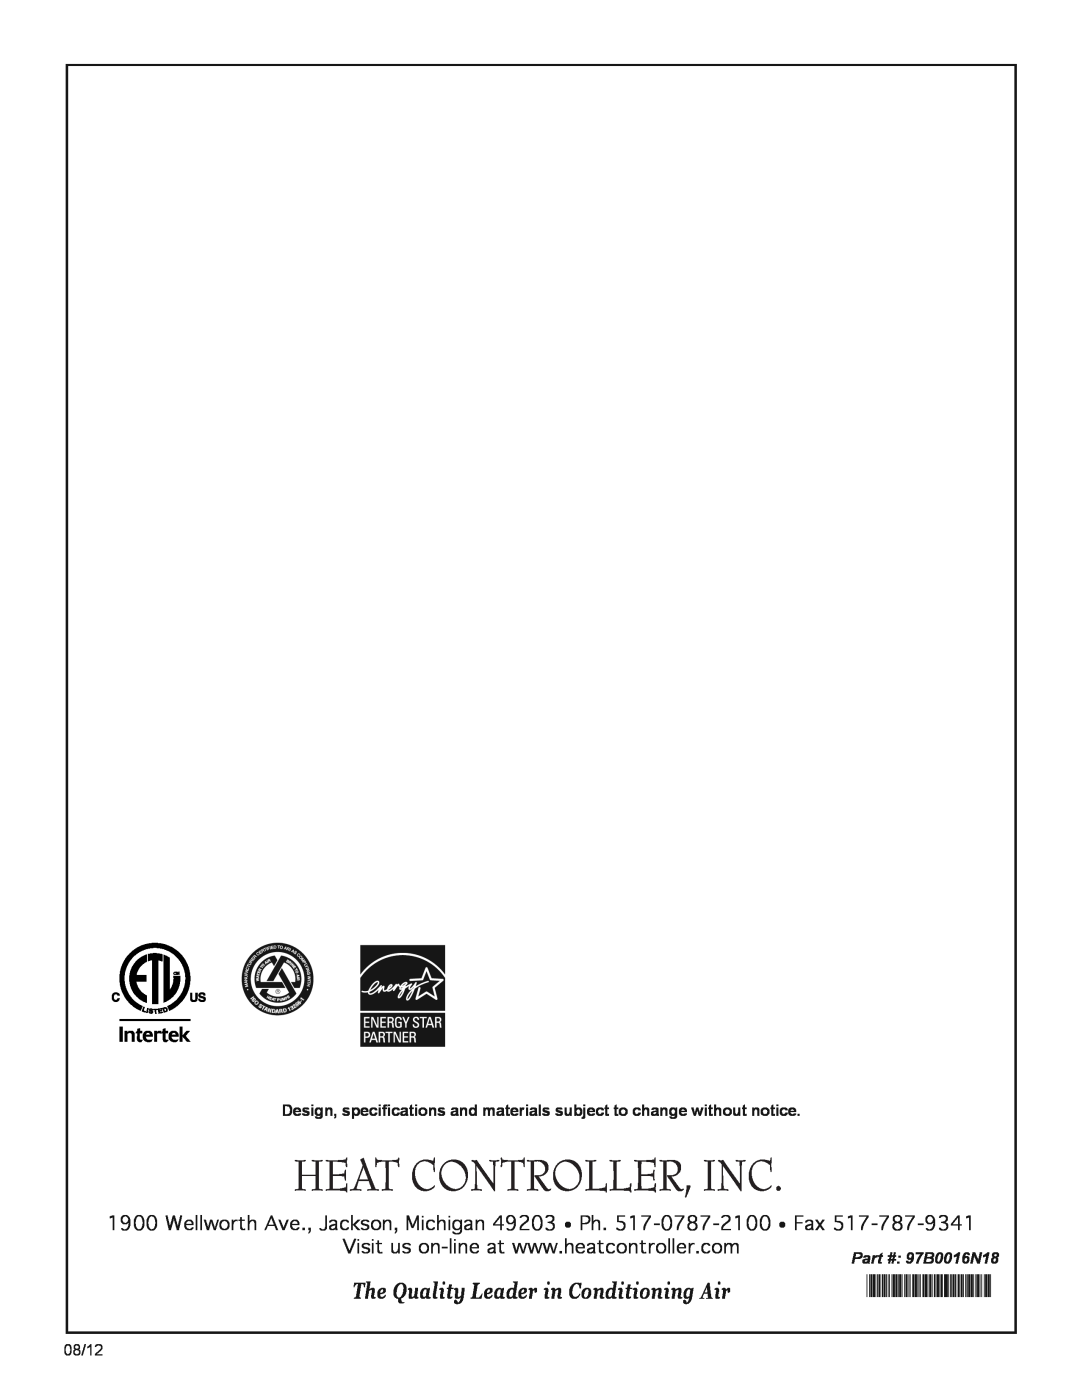 Heat Controller HTS SERIES manual 97B0016N18, The Quality Leader in Conditioning Air, Dard, Ied To, At Pump 